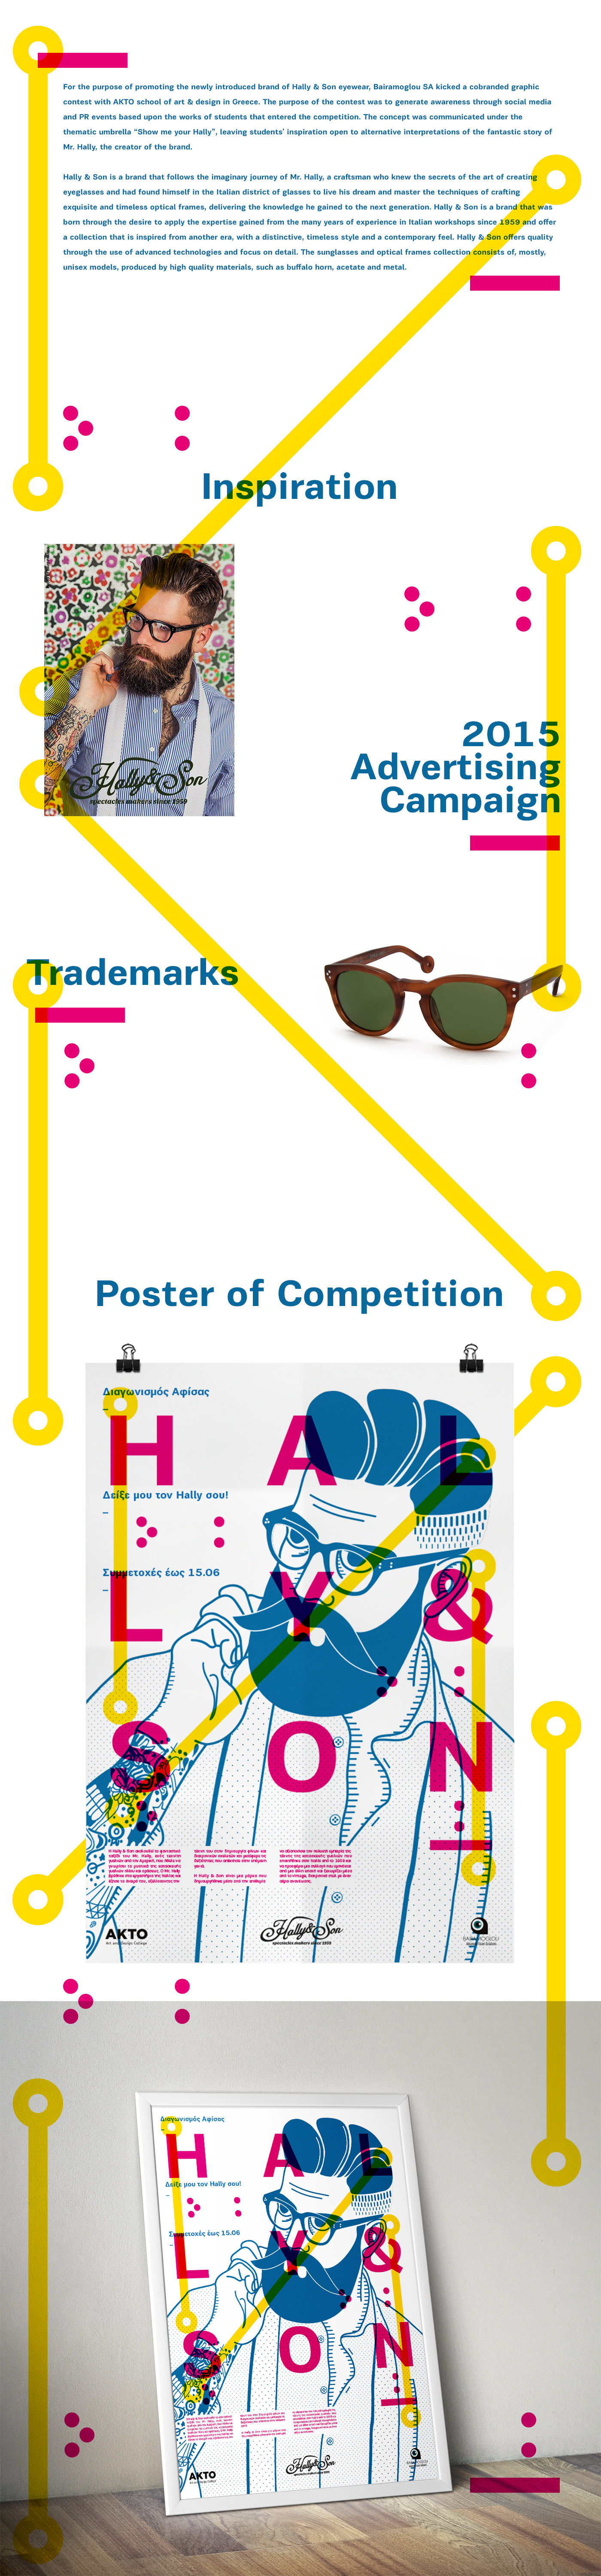 poster design typo Sunglasses Competition contest hally&son eyewear art pantone Character illustrations grid gallery print